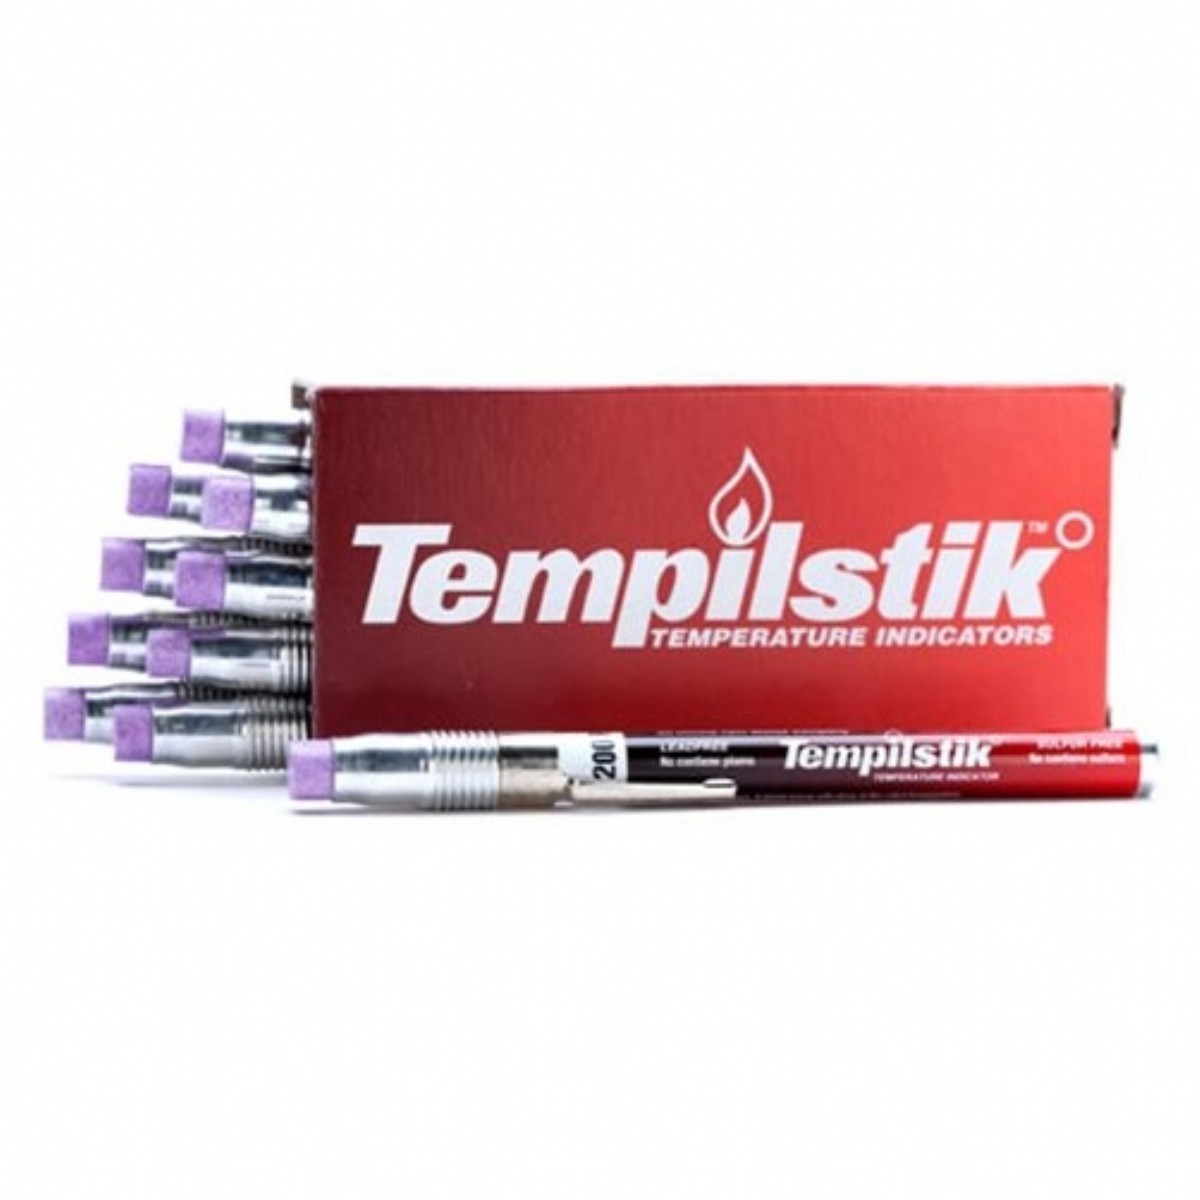 ASSEMBLY AND AUXILIARY MATERIALS | TEMPILSTIK Â° TS0650 TEMPILSTICK TEMPERATURE INDICATORS THERMOMETER  | 5007 | aircraft, aircraft, ams, ardrox, chemetal, imcaero, surfchemistry, nsn, nato, military, boeing, falcon, airbus, thermometer, control, TEMPIL Â° TS0650 TEMPILSTICK TEMP.  | 